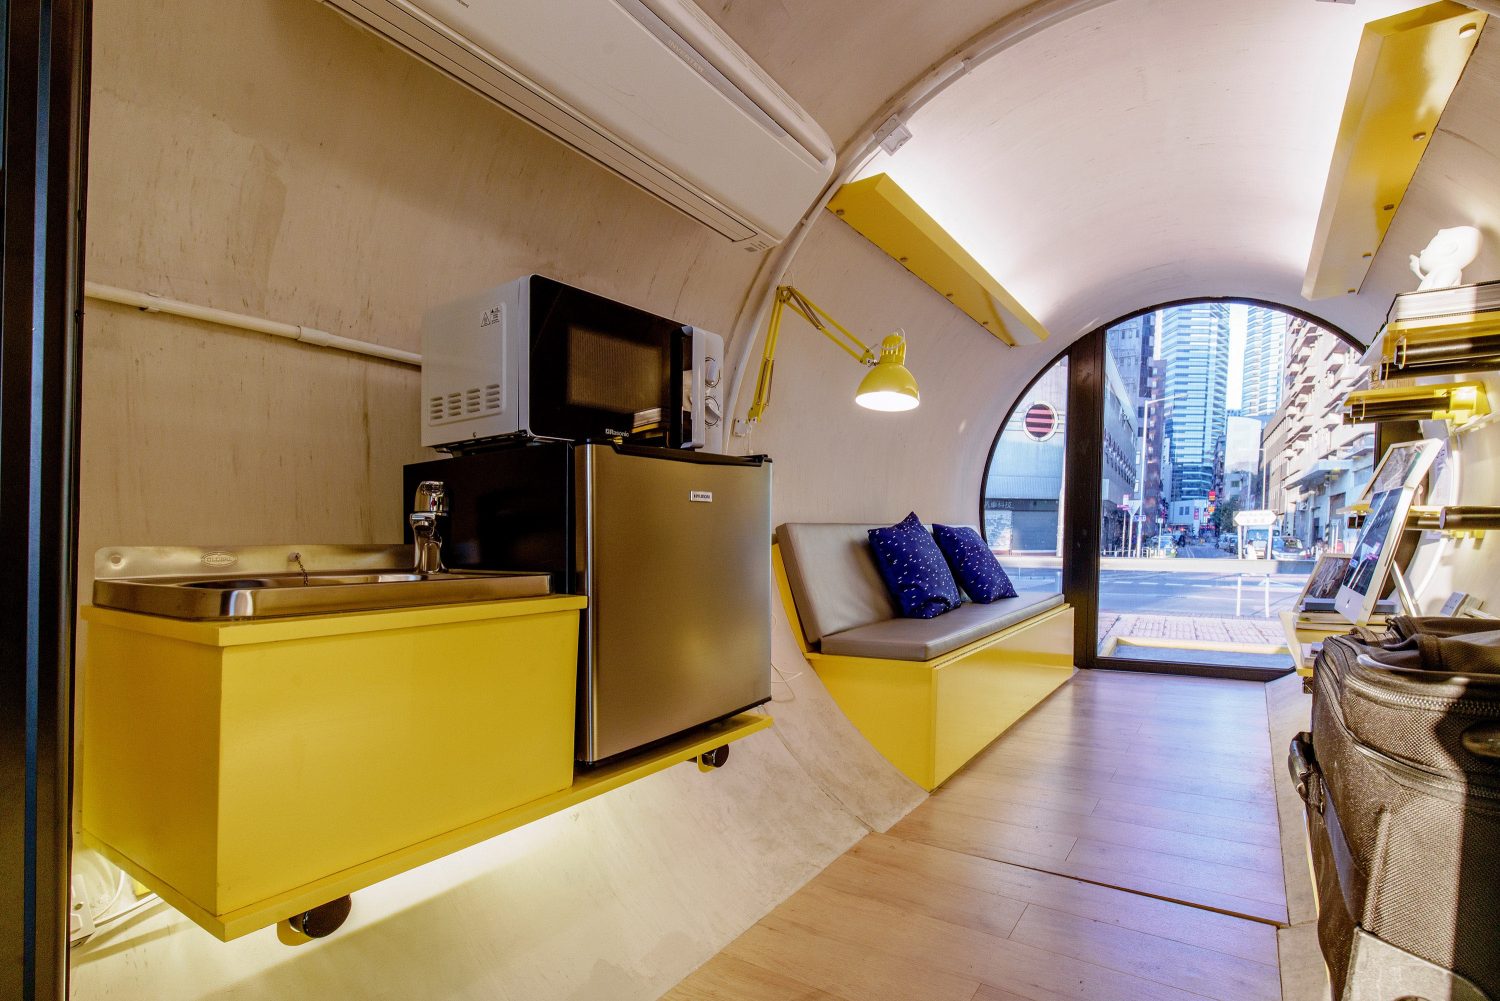 OPod Tube House by James Law Cybertecture